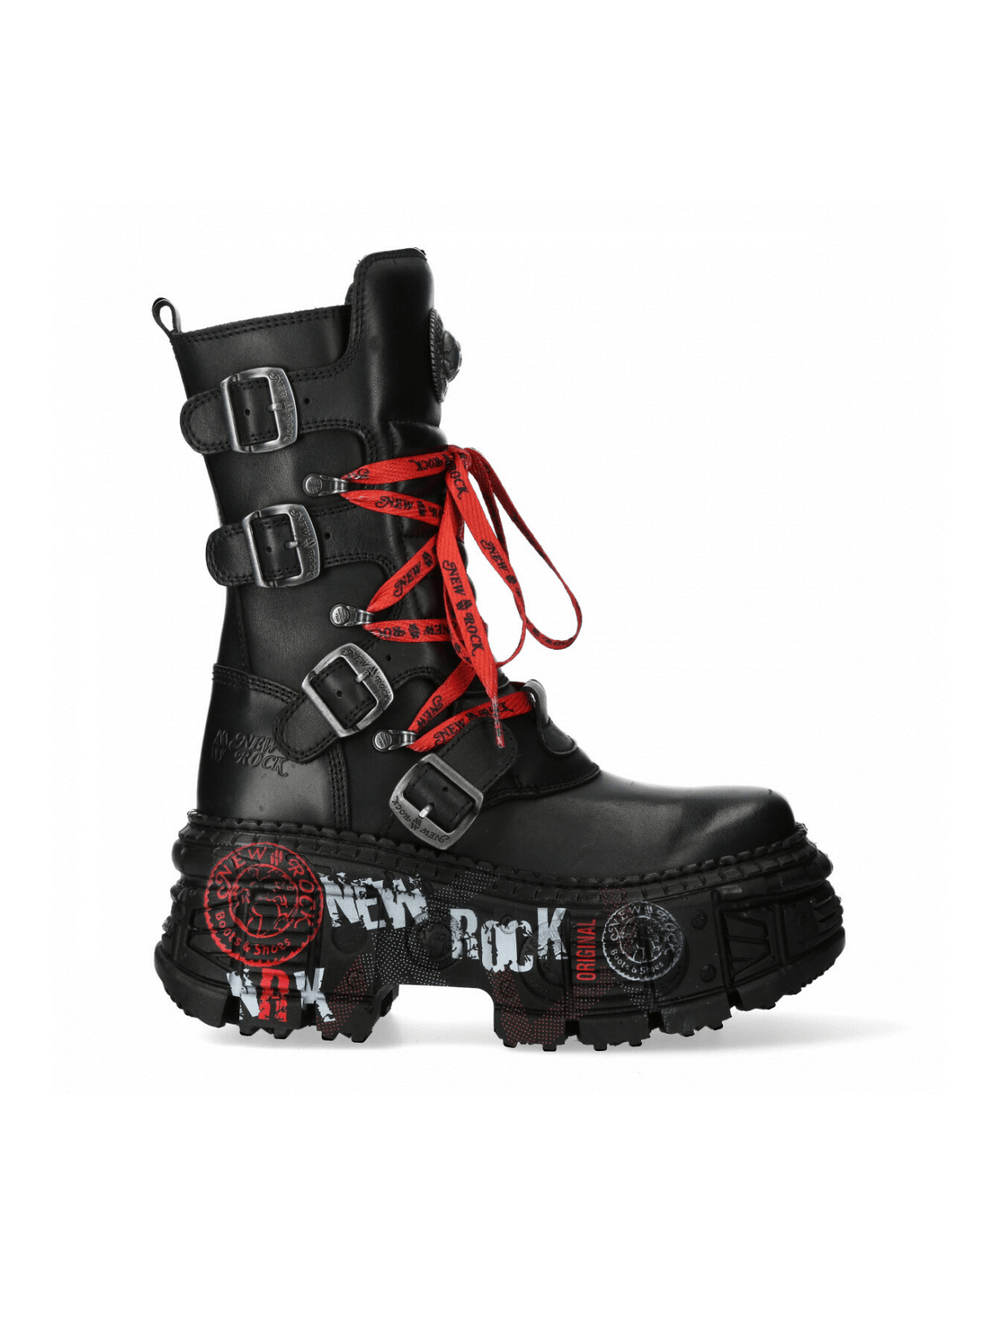 NEW ROCK Studded Gothic Rock Boots - Versatile and Bold